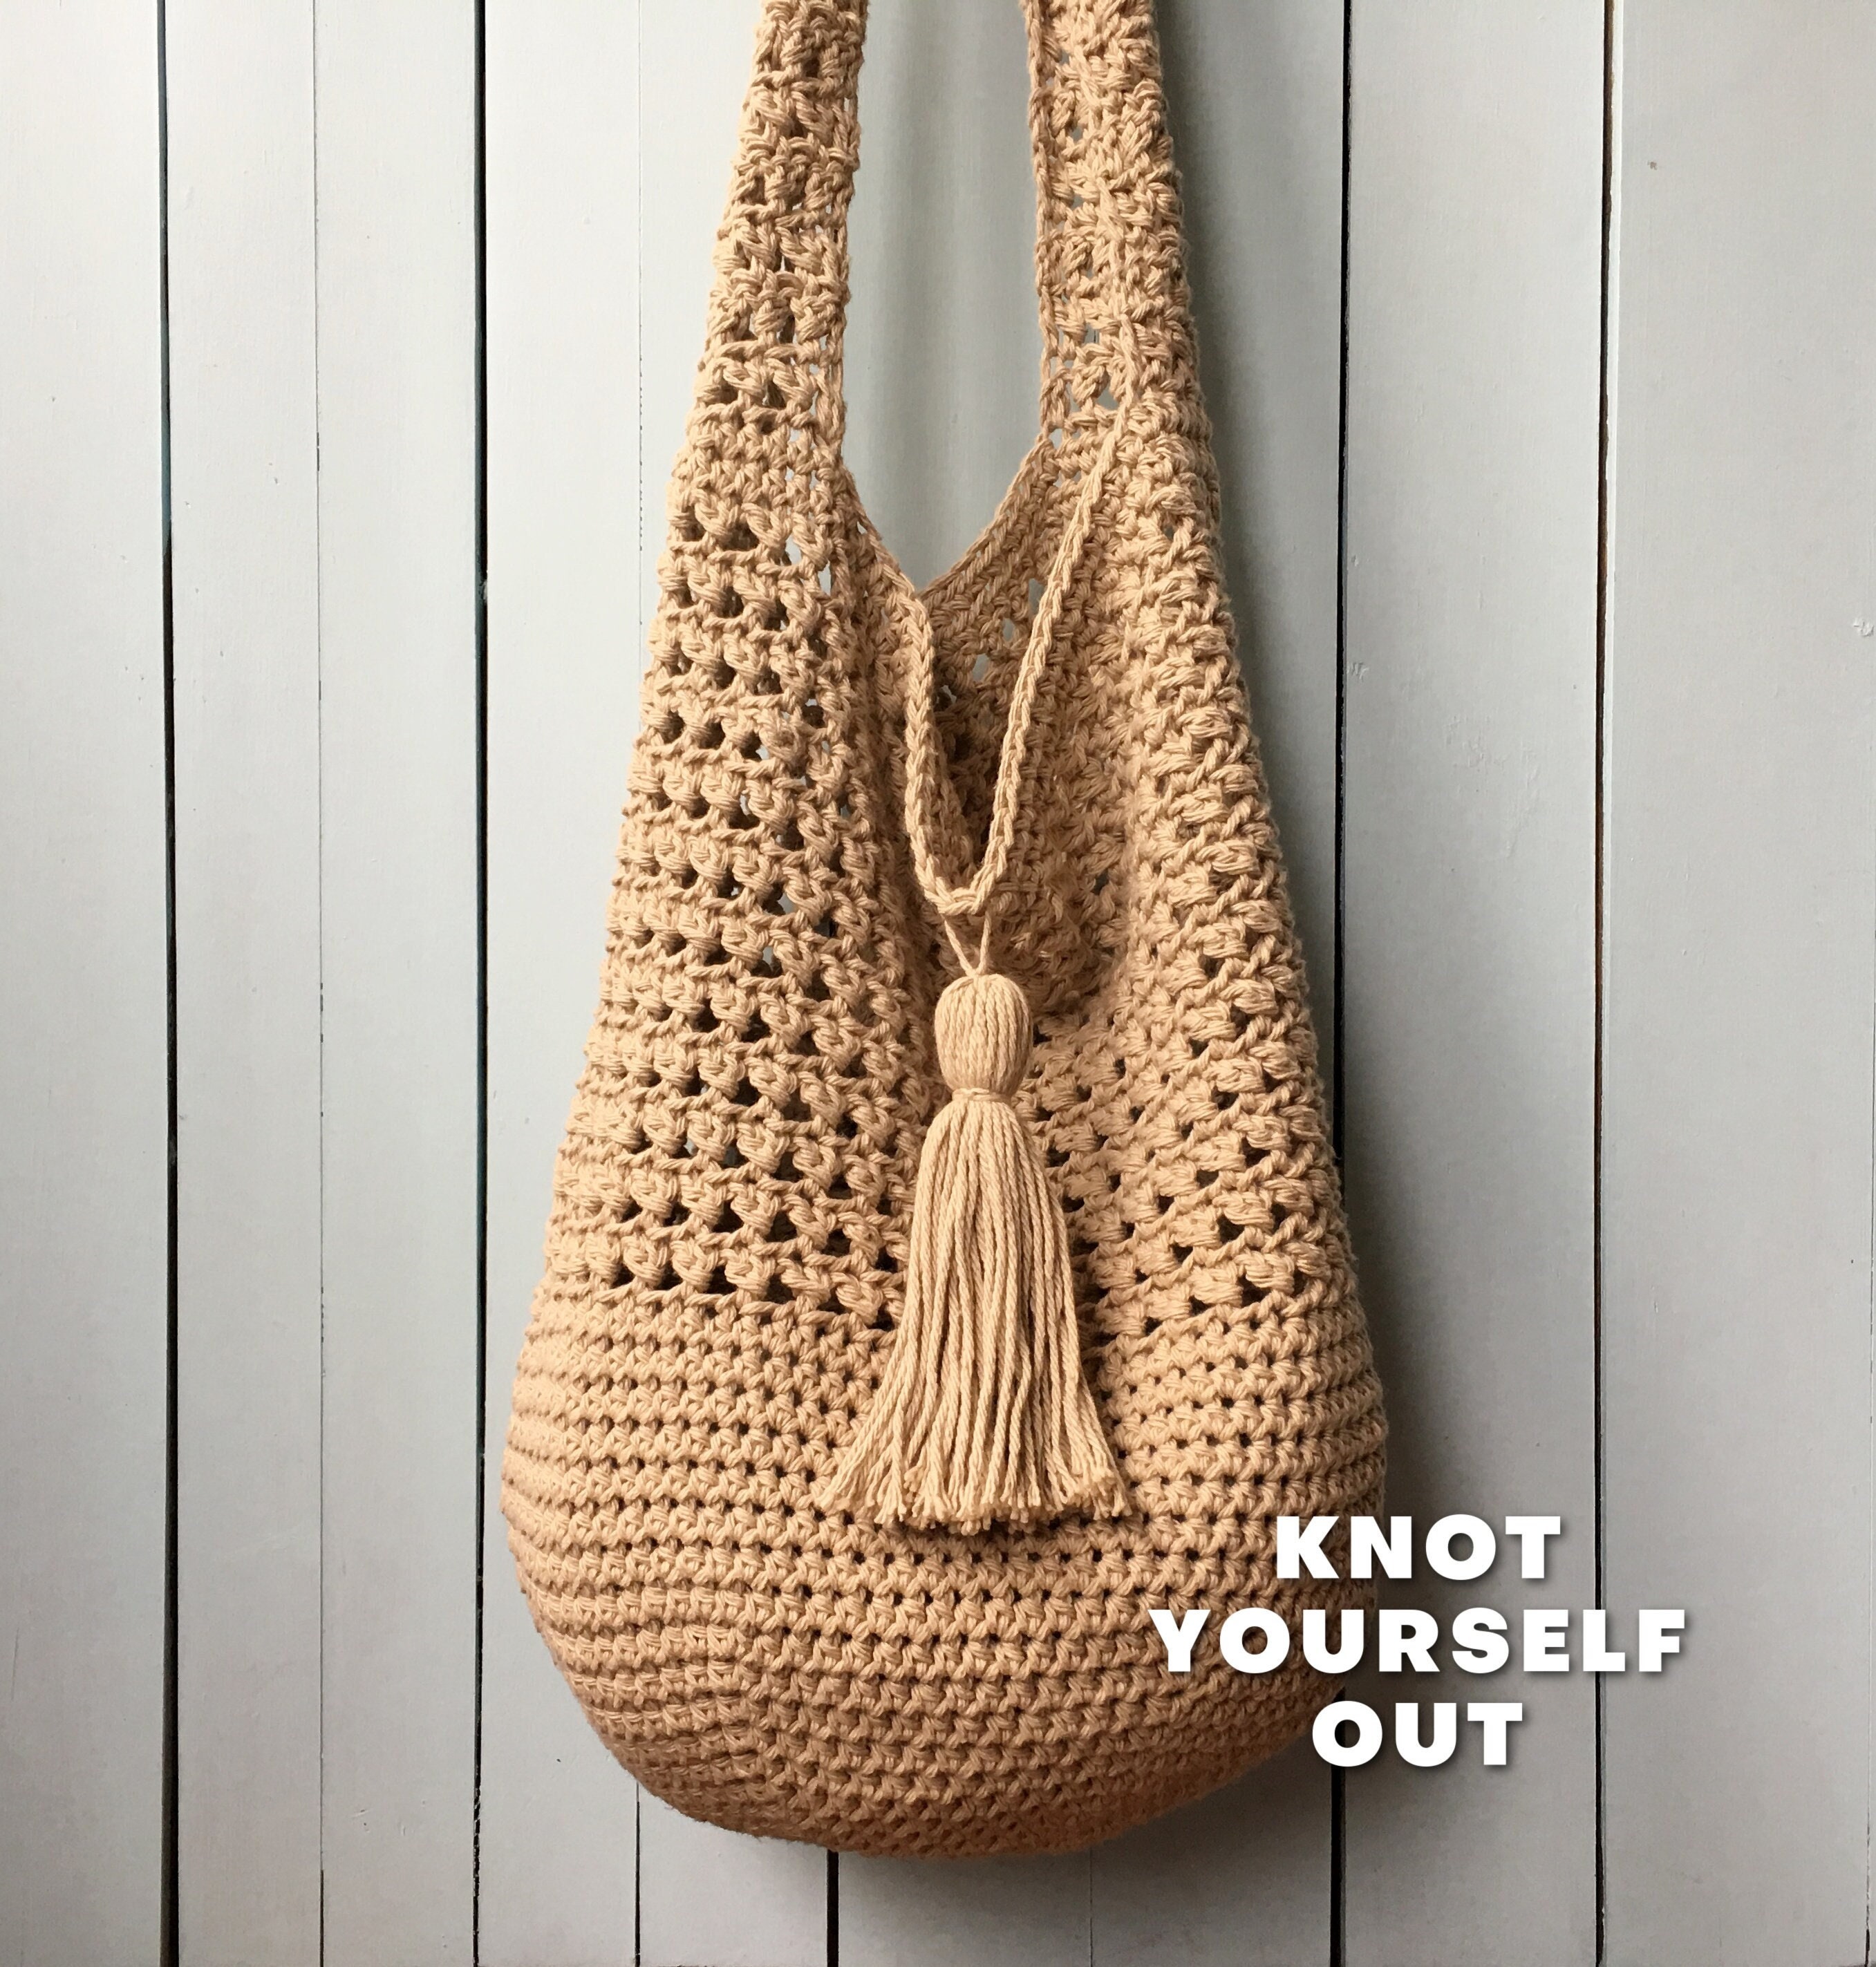 Bohemian Style Knitted Tote Bag - The Rainbow Locker